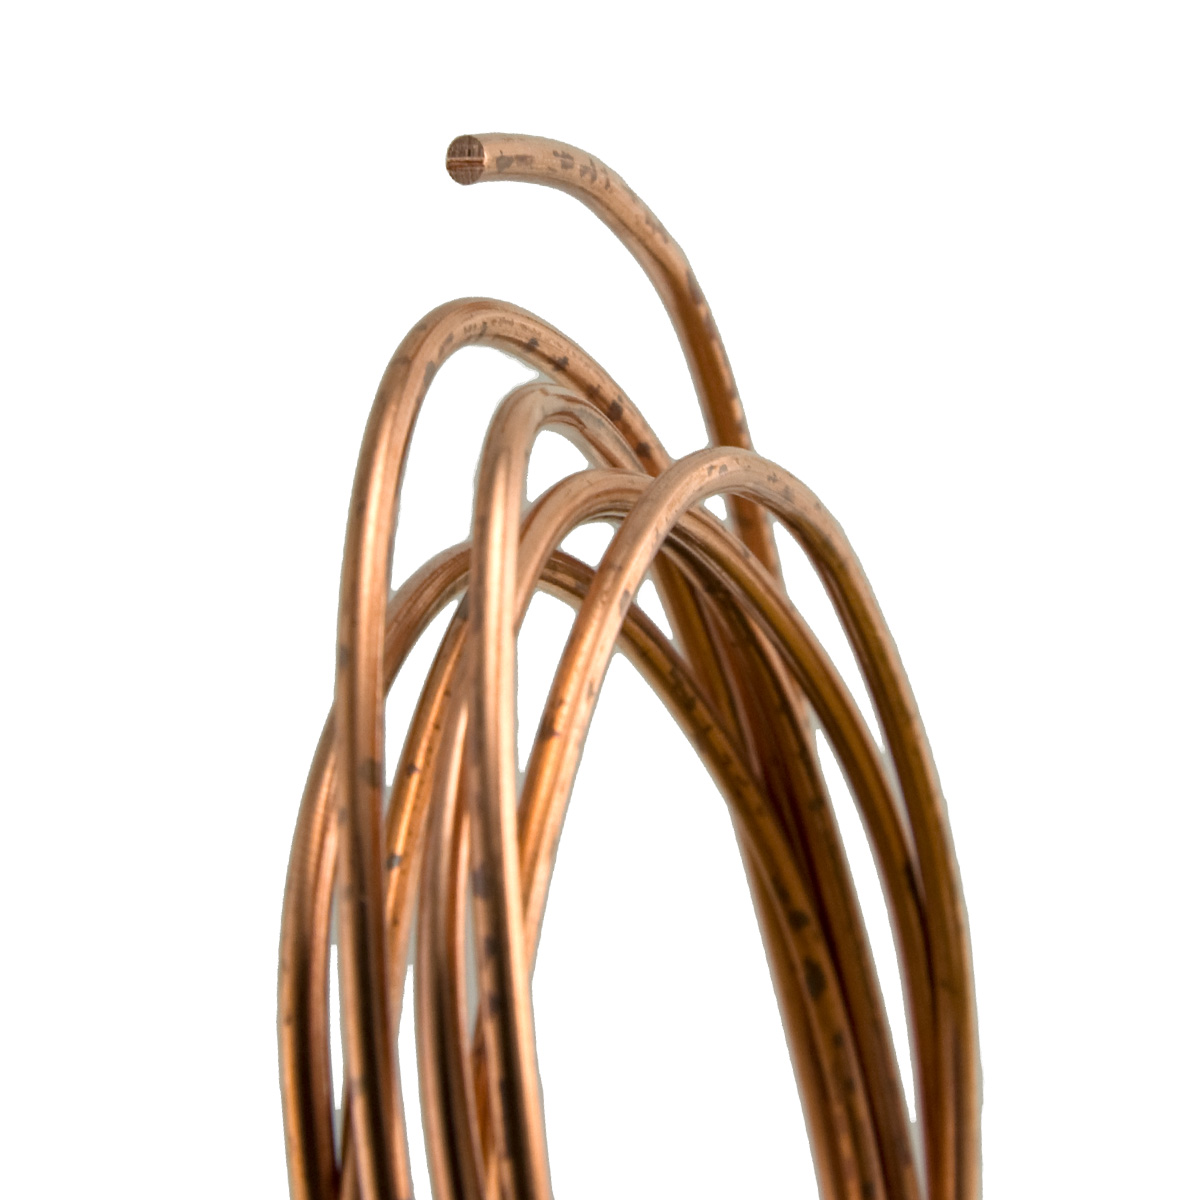 8 Gauge Round Dead Soft Copper Wire: Jewelry Making Supplies, Instructions